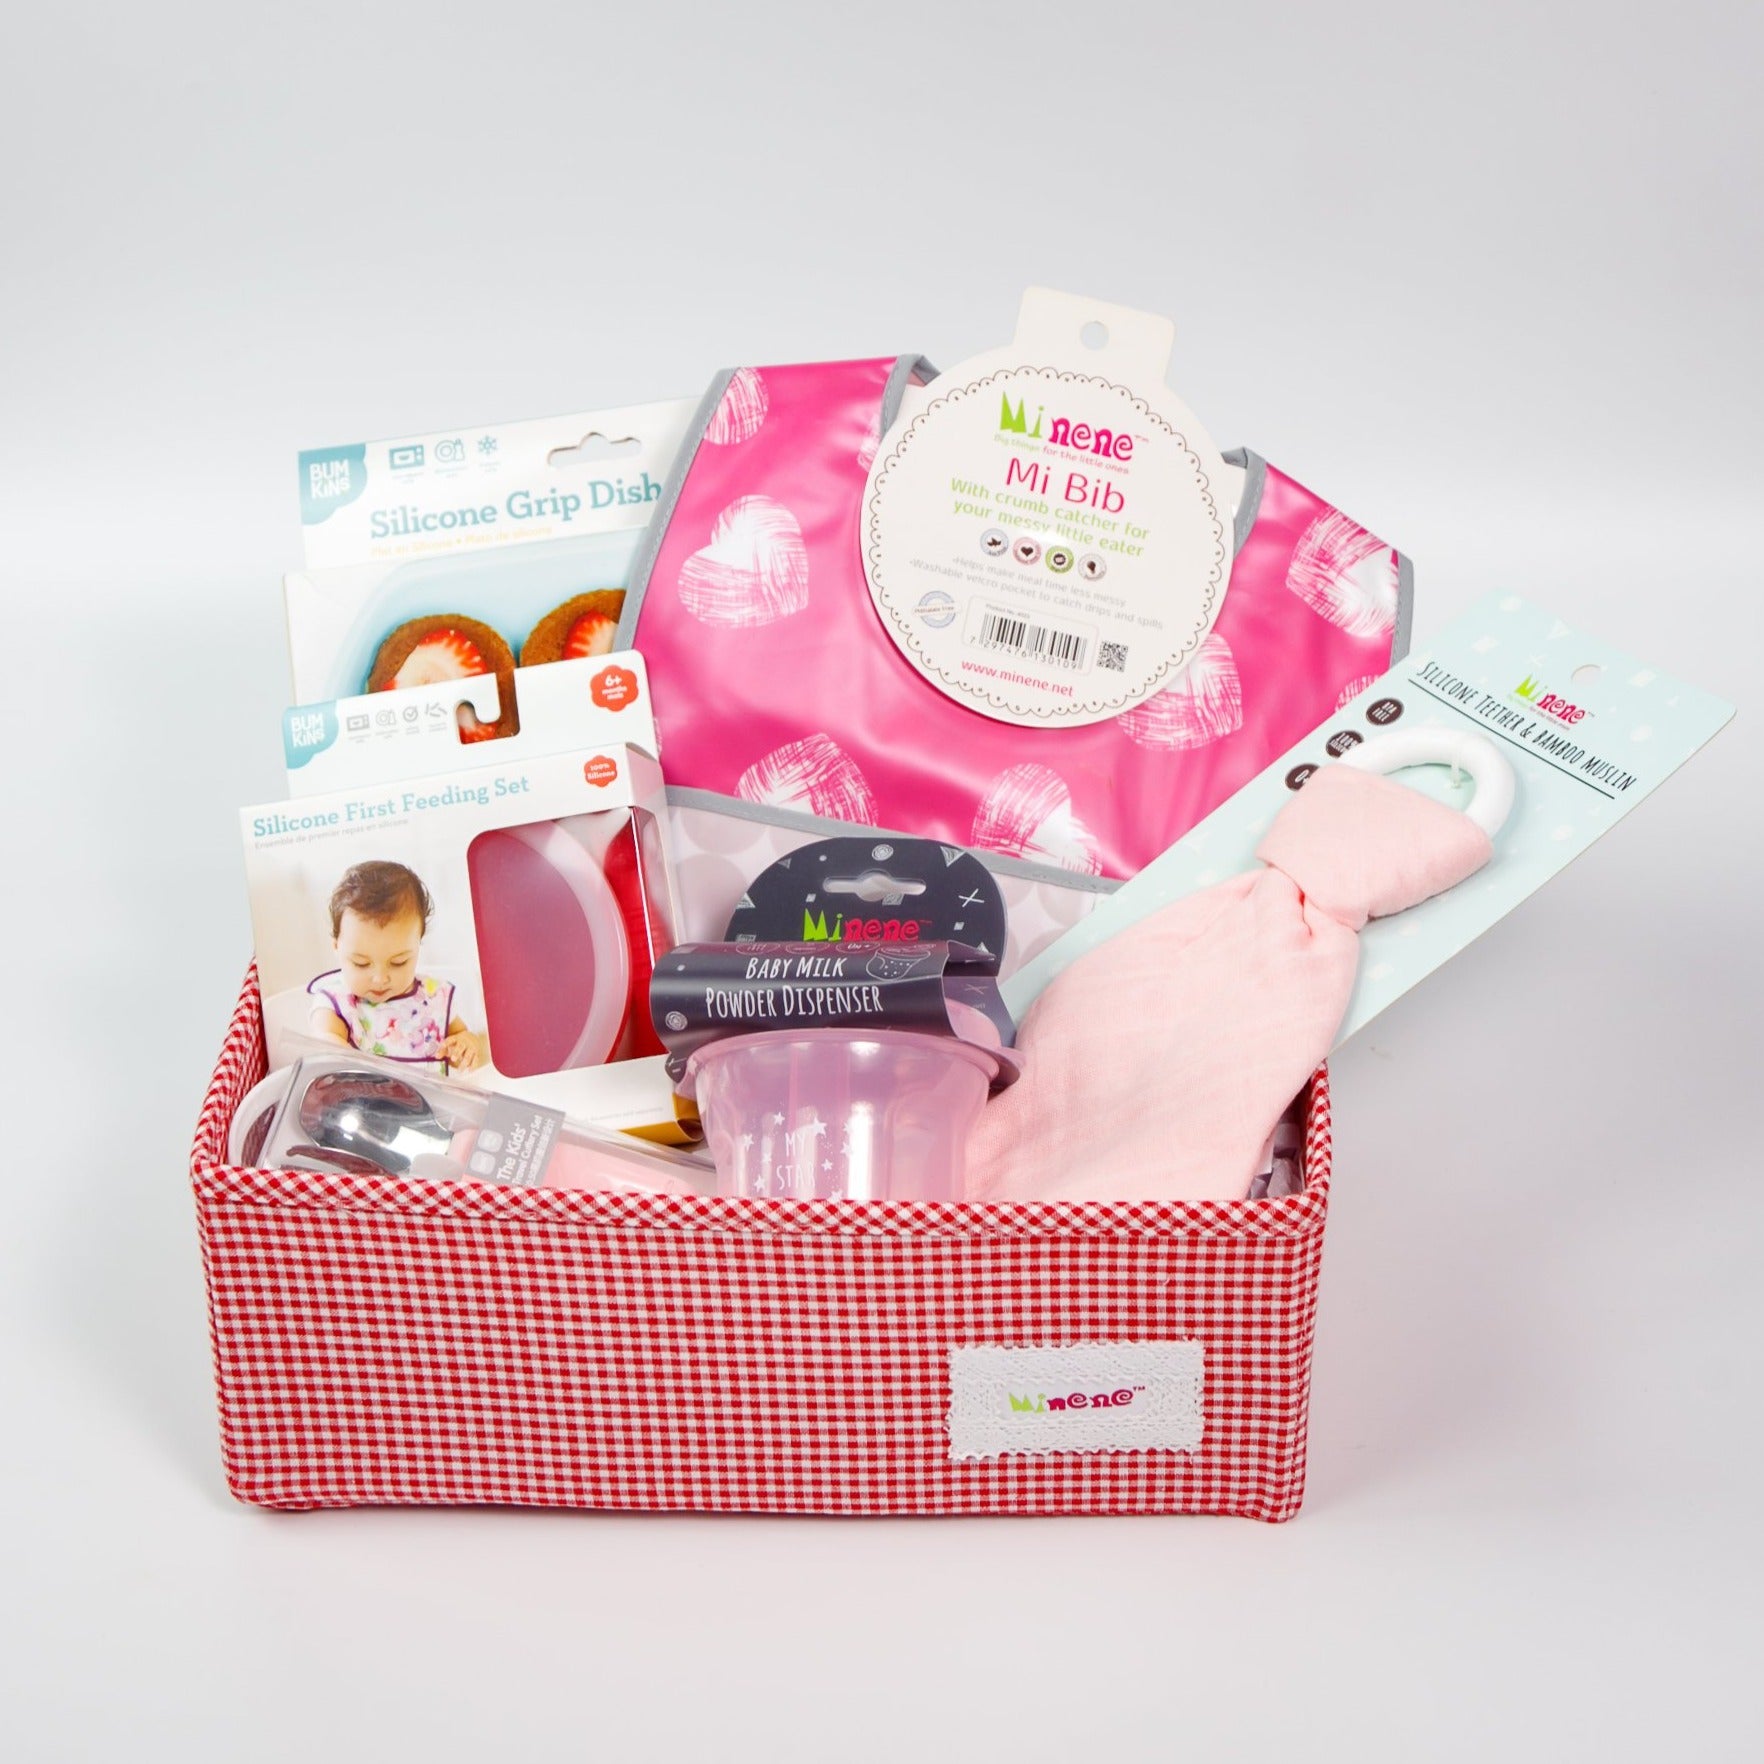 First Feeding Time Gift Box - Red